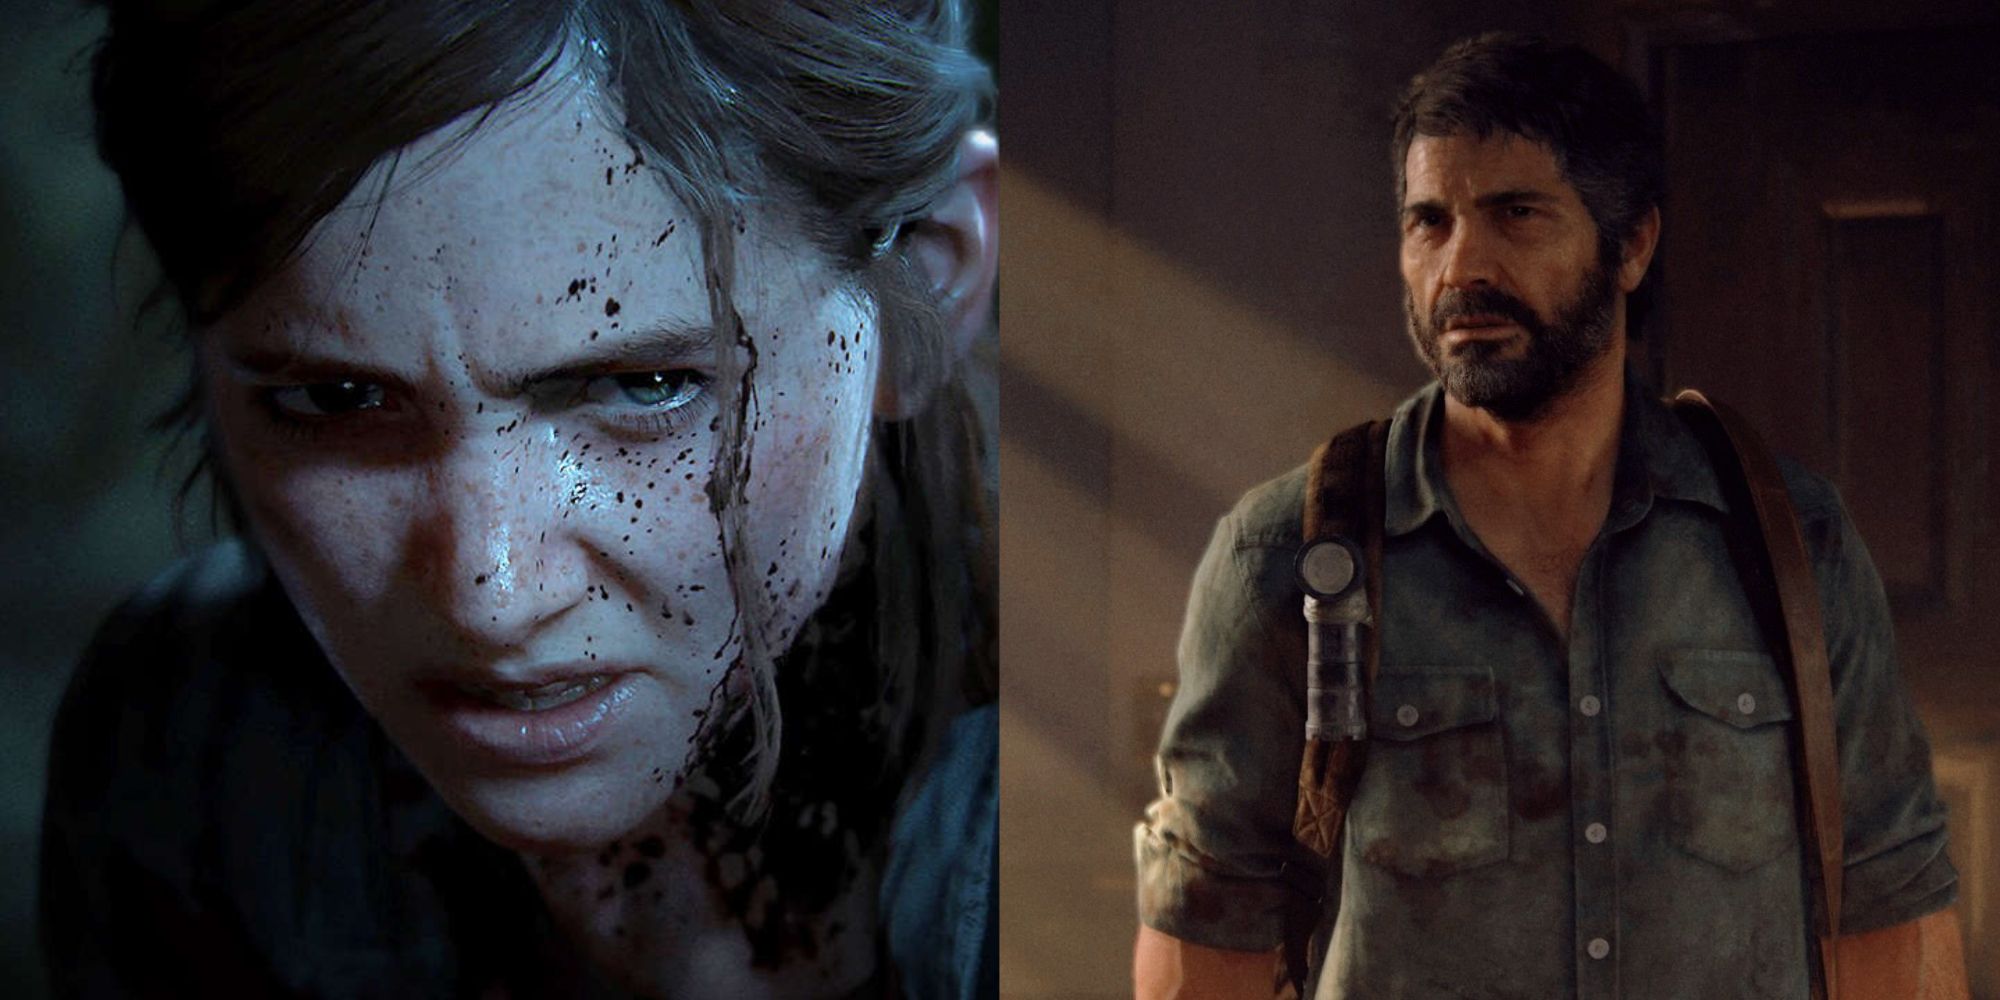 Split images of Ellie angry and Joel with a backpack in The Last of Us